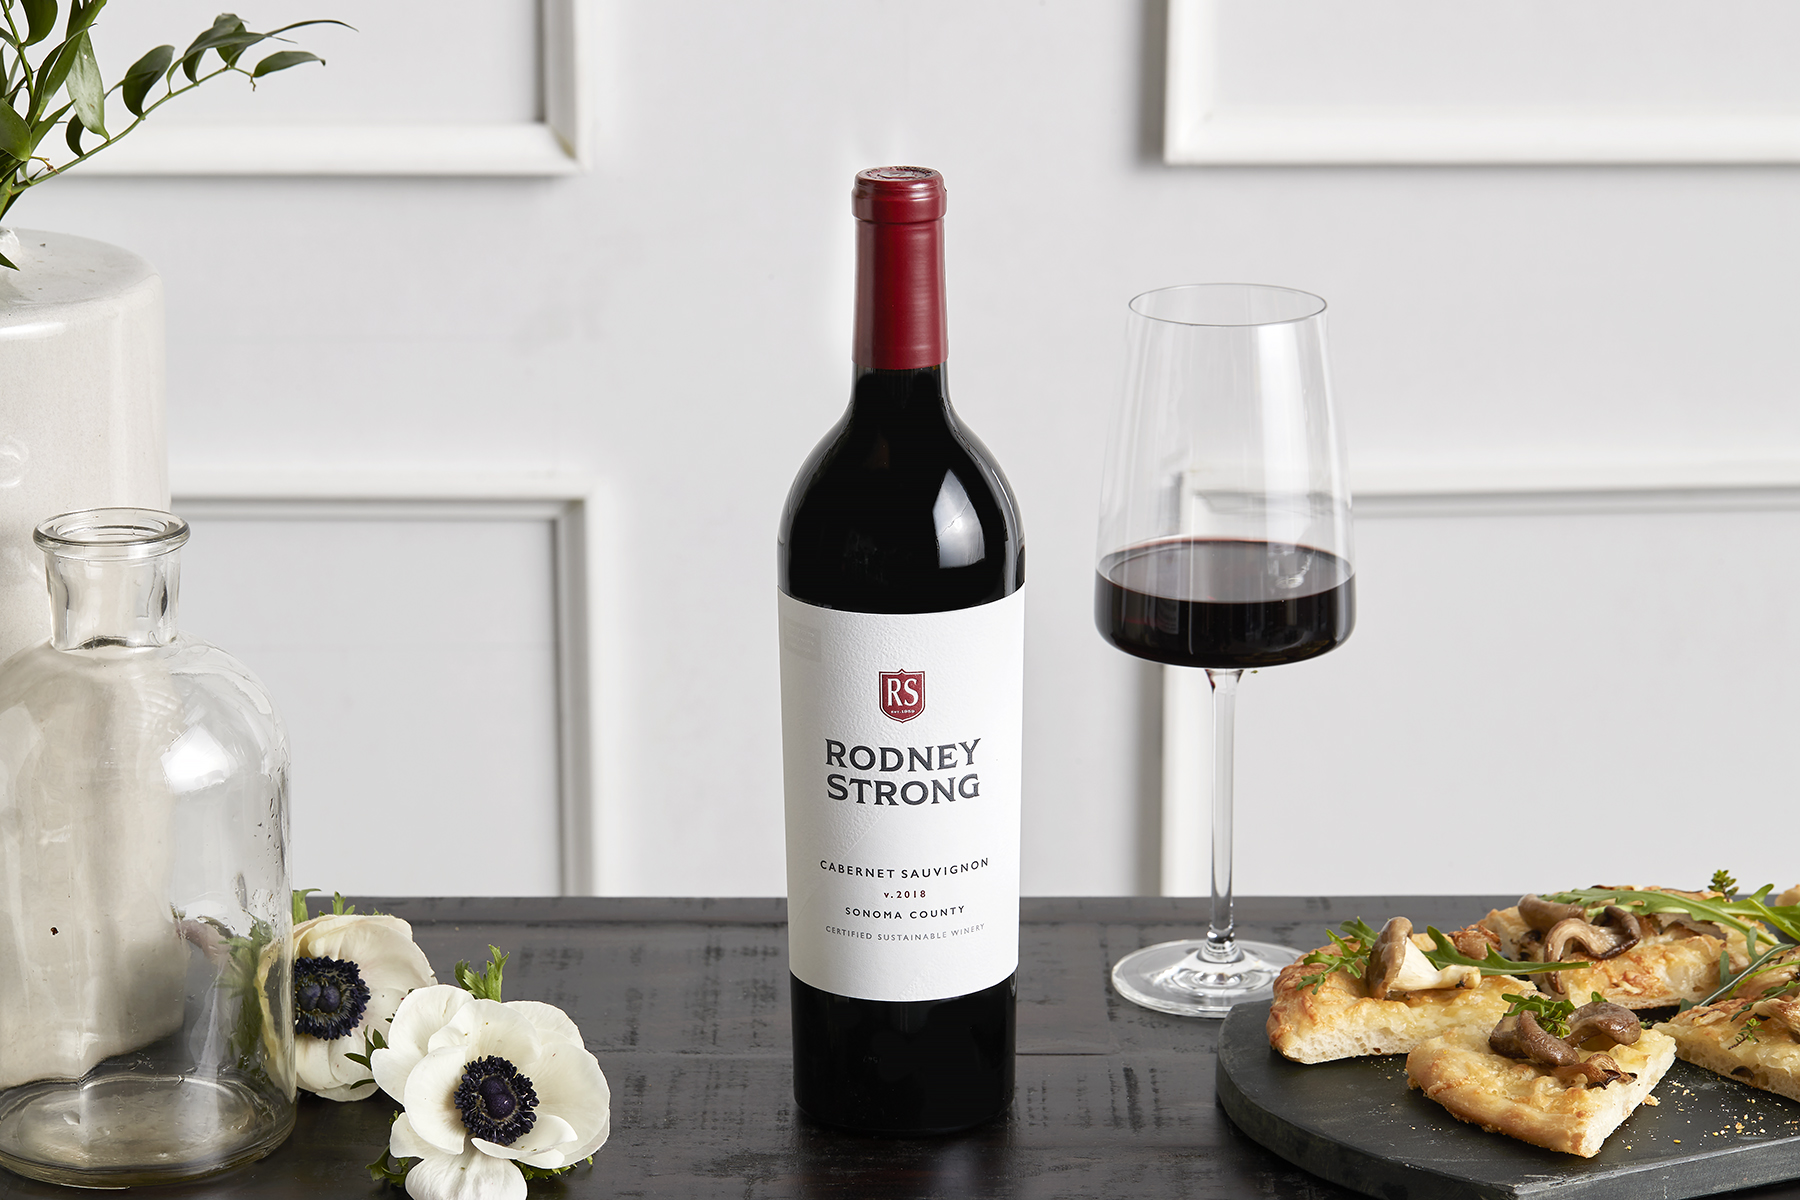 Rodney Strong Cabernet Sauvignon bottle and glass with pizza